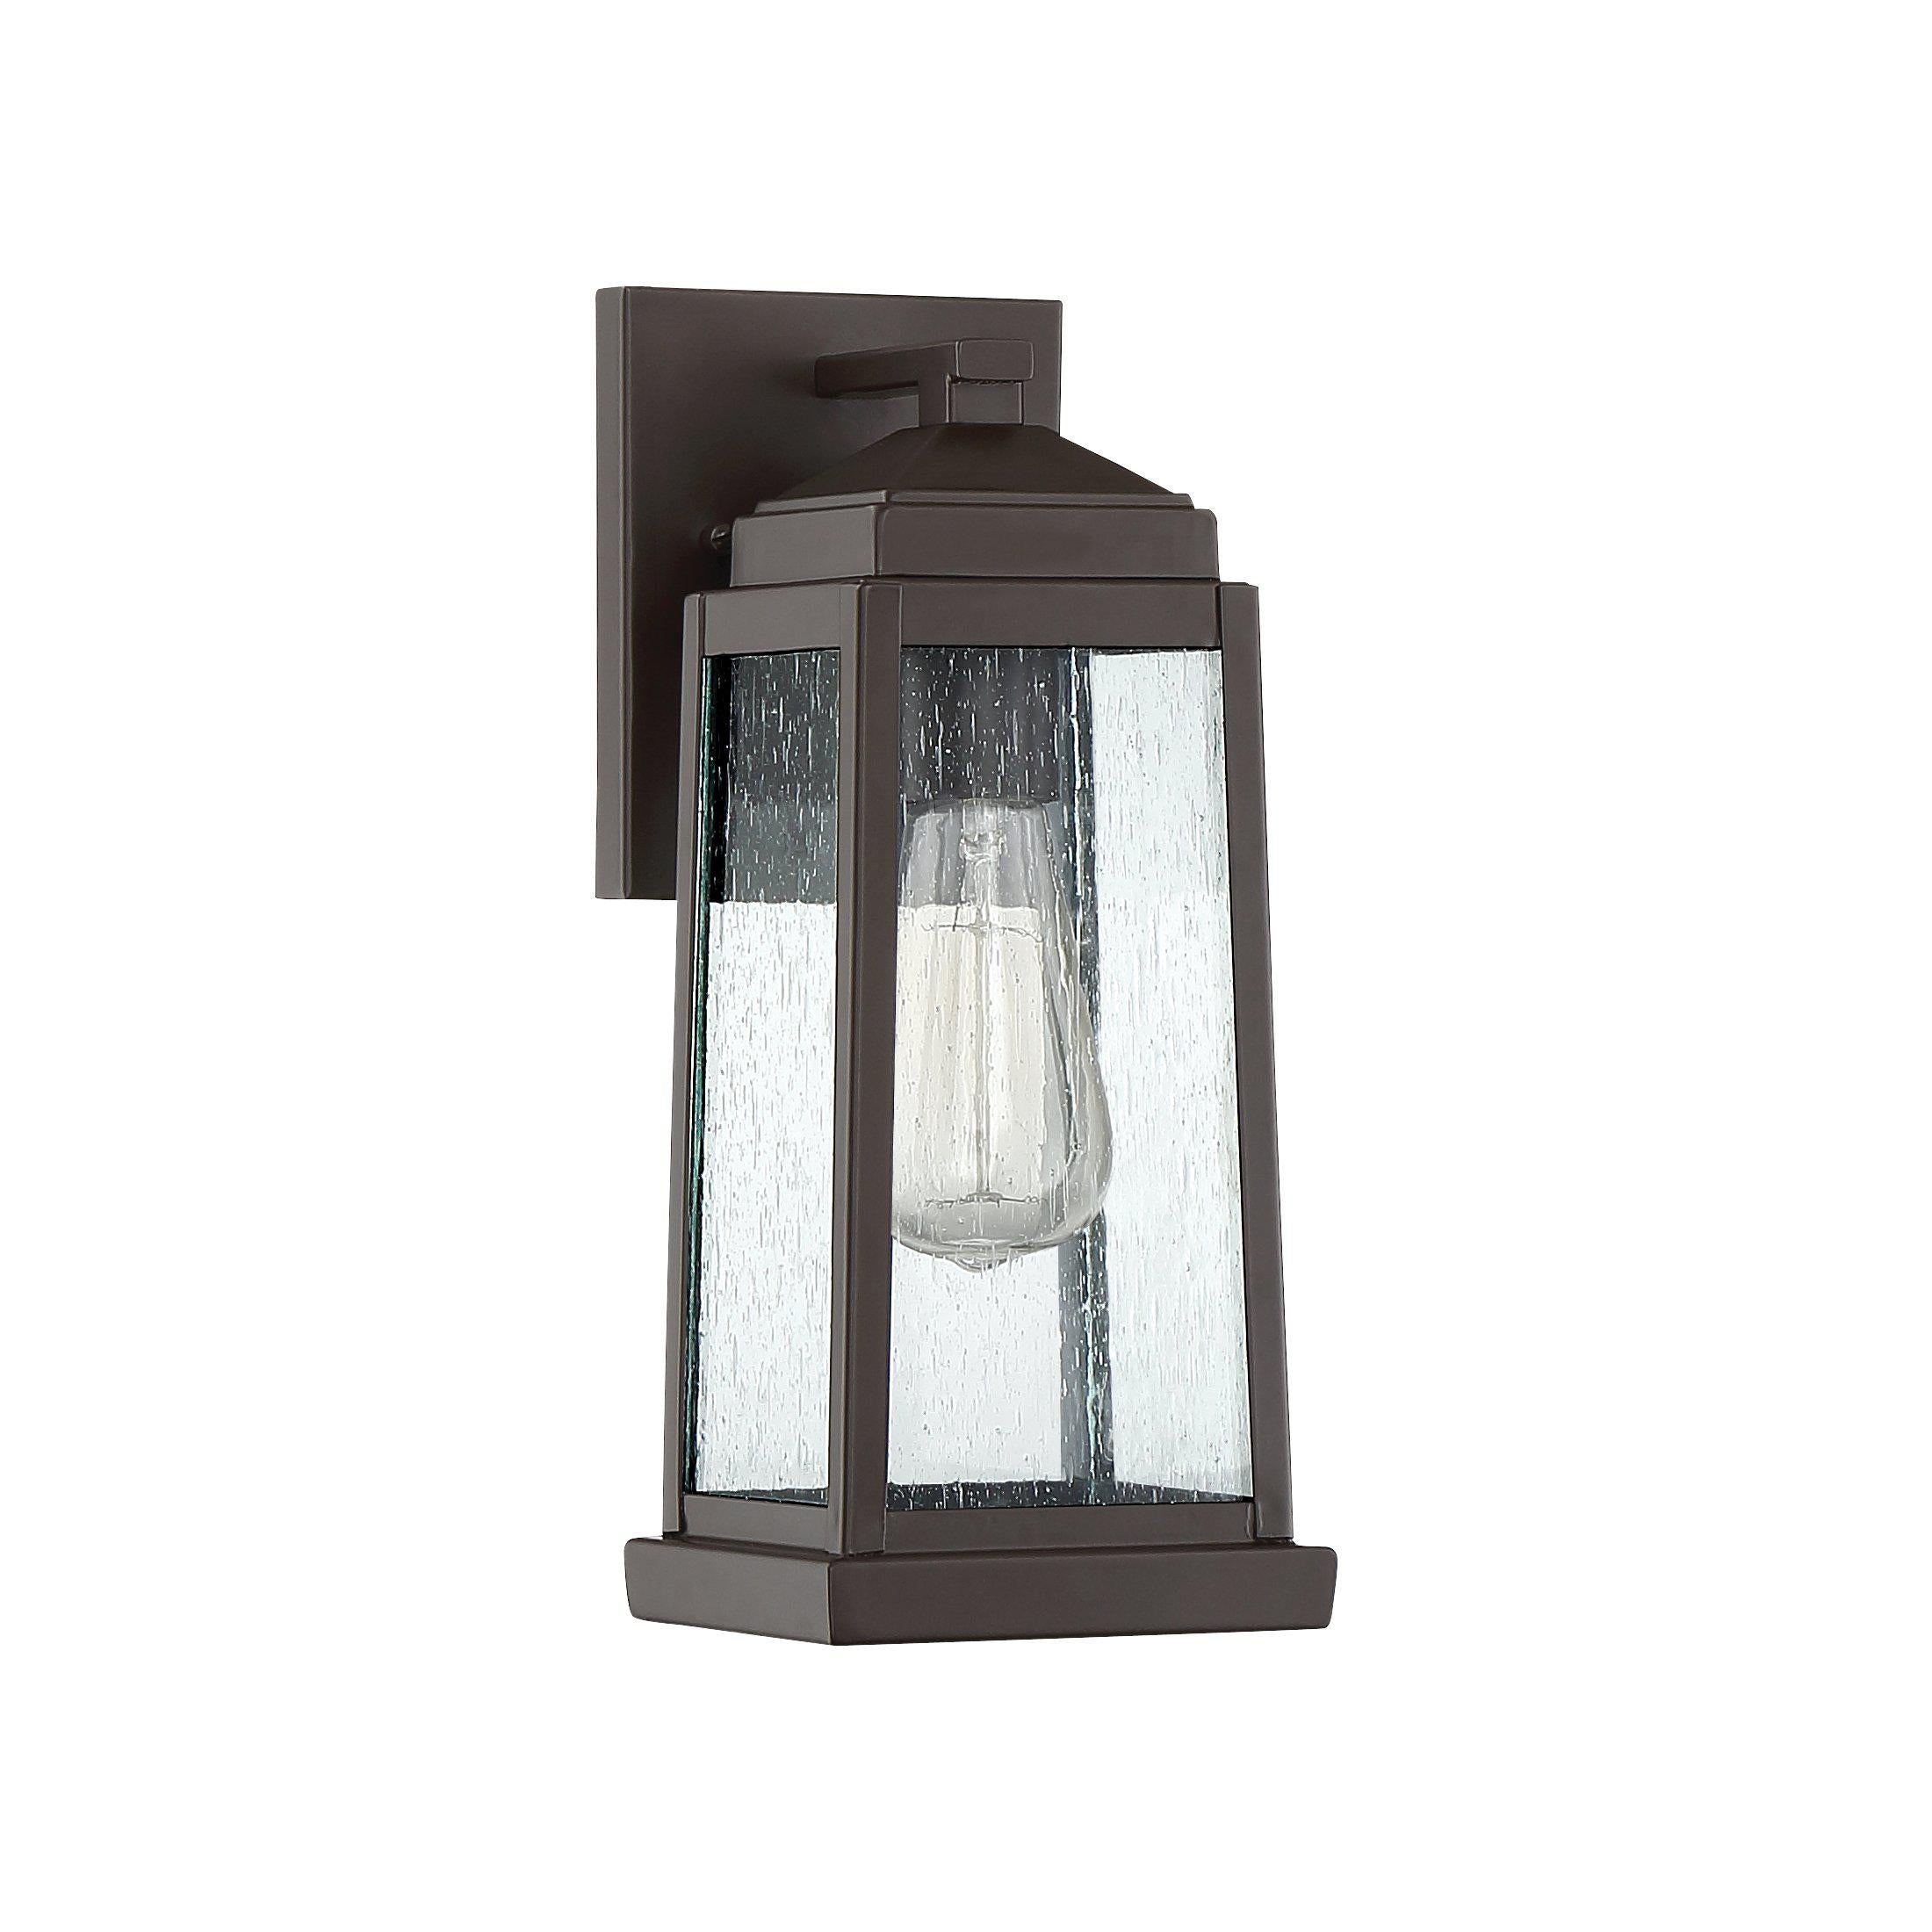 Quoizel  Ravenel Outdoor Lantern, Small Outdoor l Wall Quoizel   